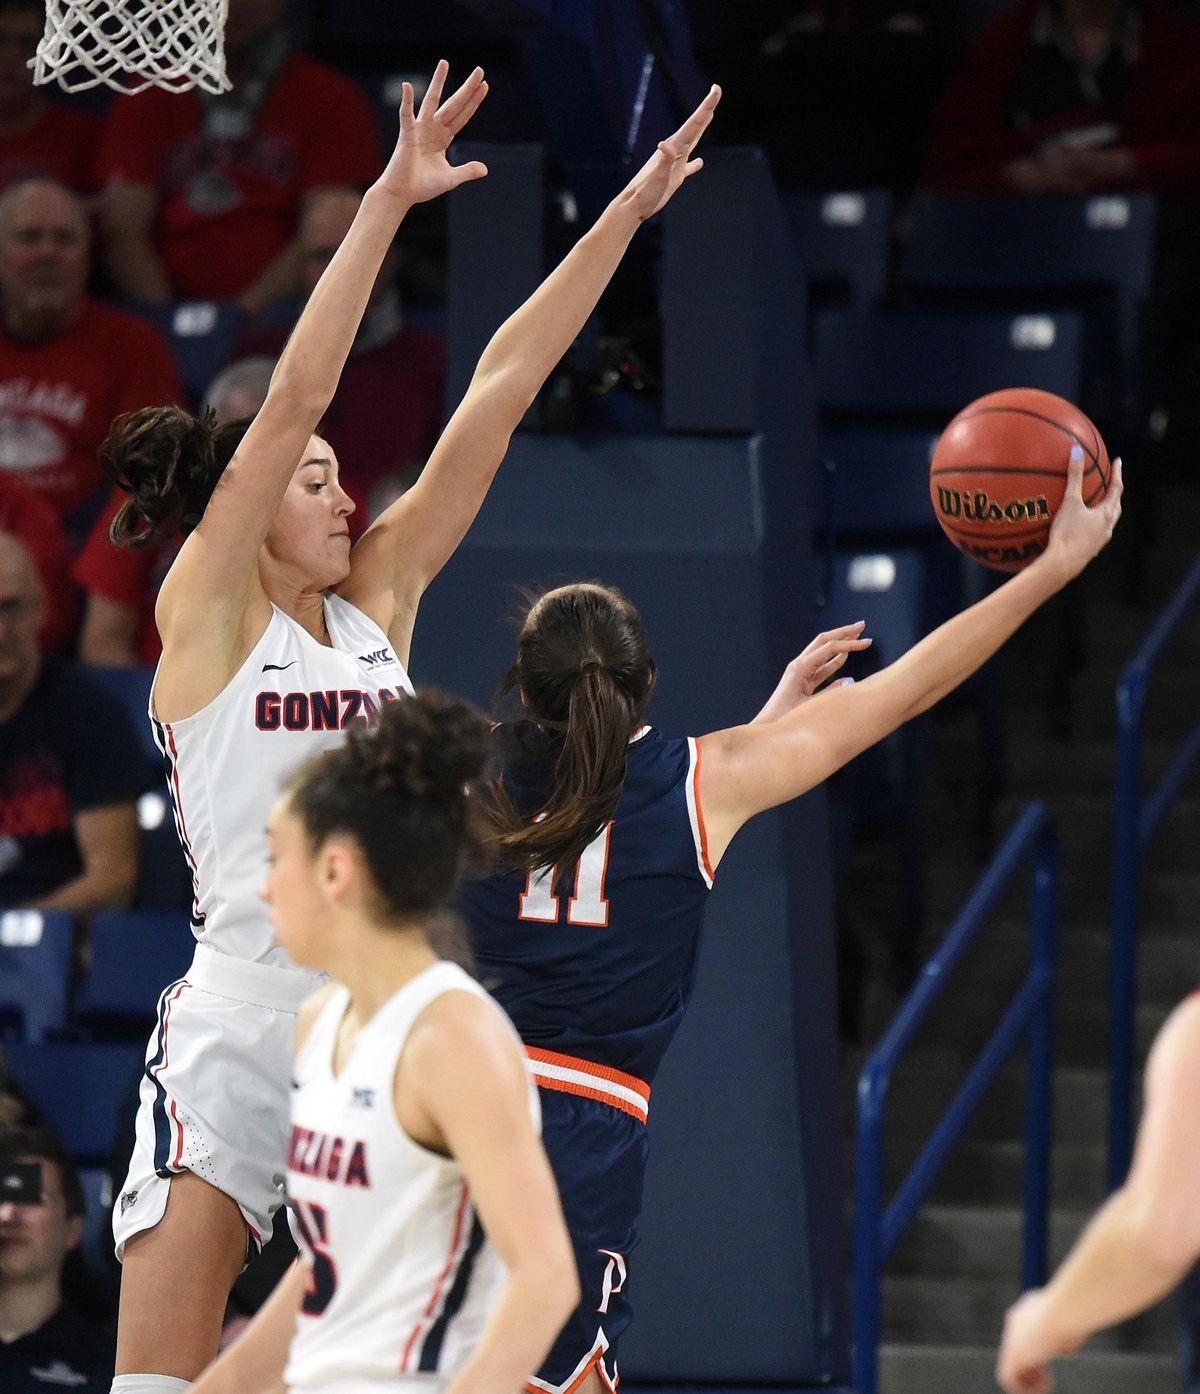 Gonzaga forward Jenn Wirth (3) tries to stop a shot by Pepperdine Waves forward Monique Andriuolo (11) during the first half of a college basketball game, Thurs., Jan. 23, 2020, at the McCarthey Athletic Center. (Colin Mulvany / The Spokesman-Review)